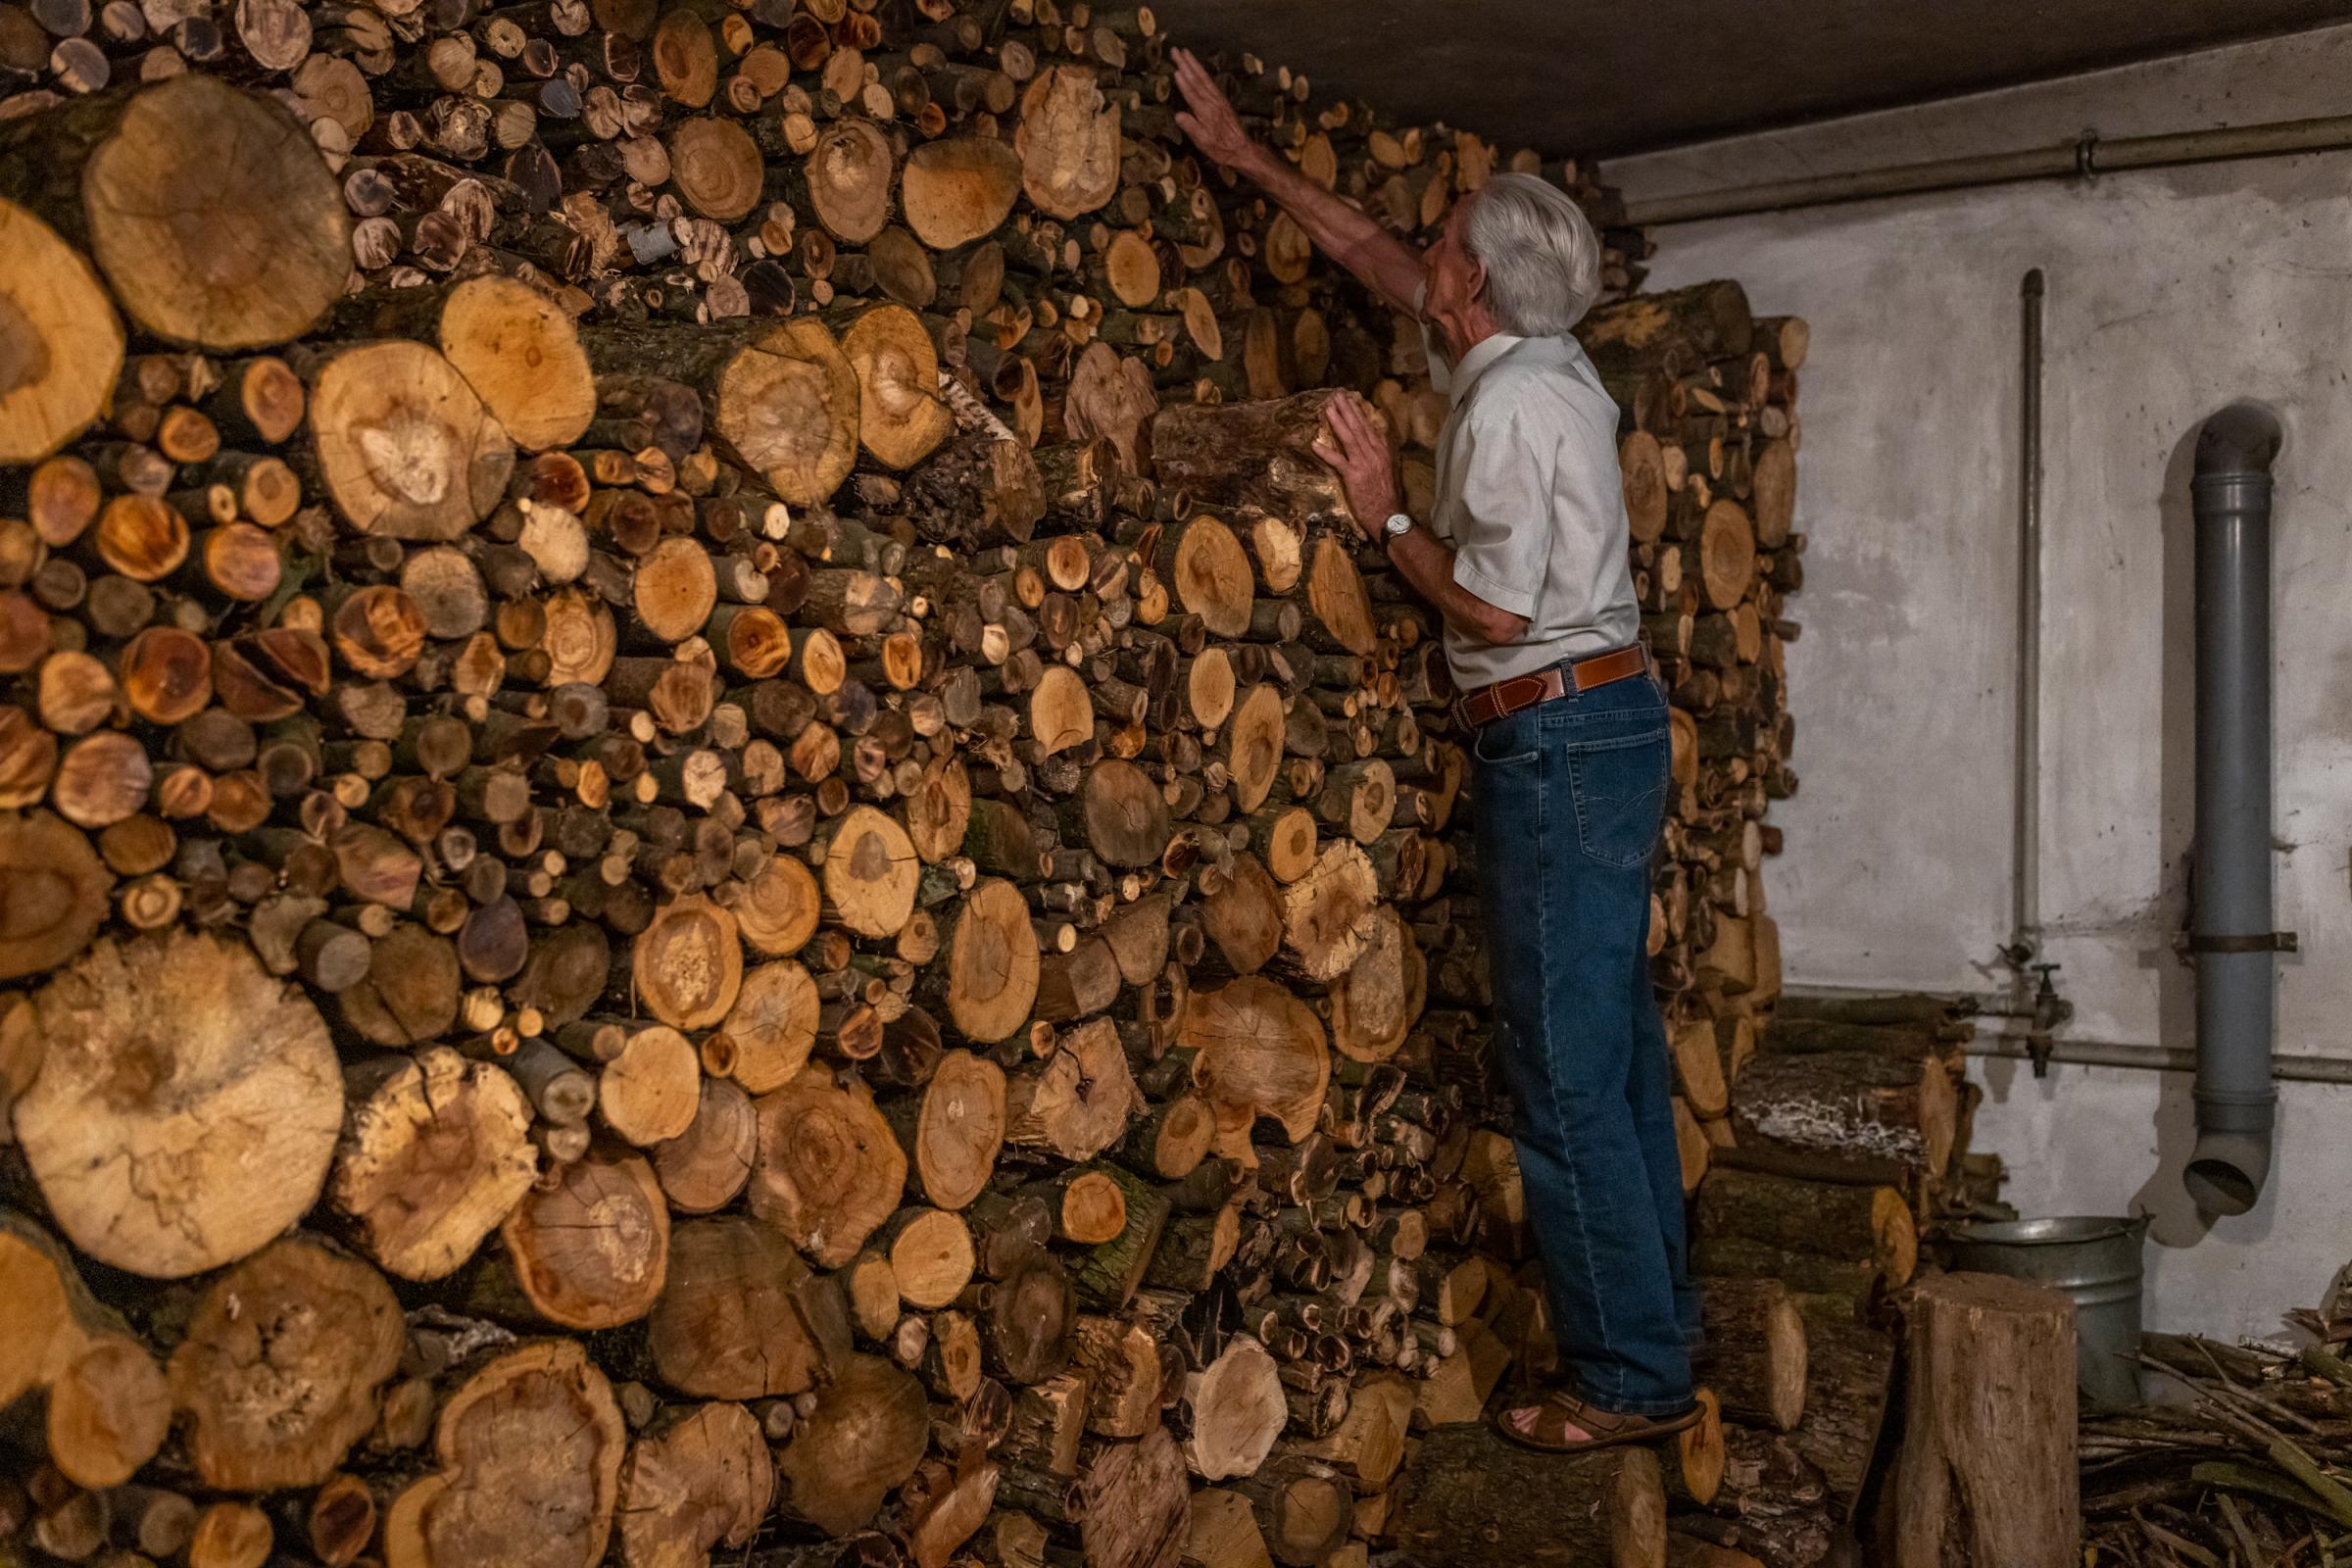 HEAT PUMPS- for The Washington Post - Andrzej K. 83, stores wood to help combat the coal and...